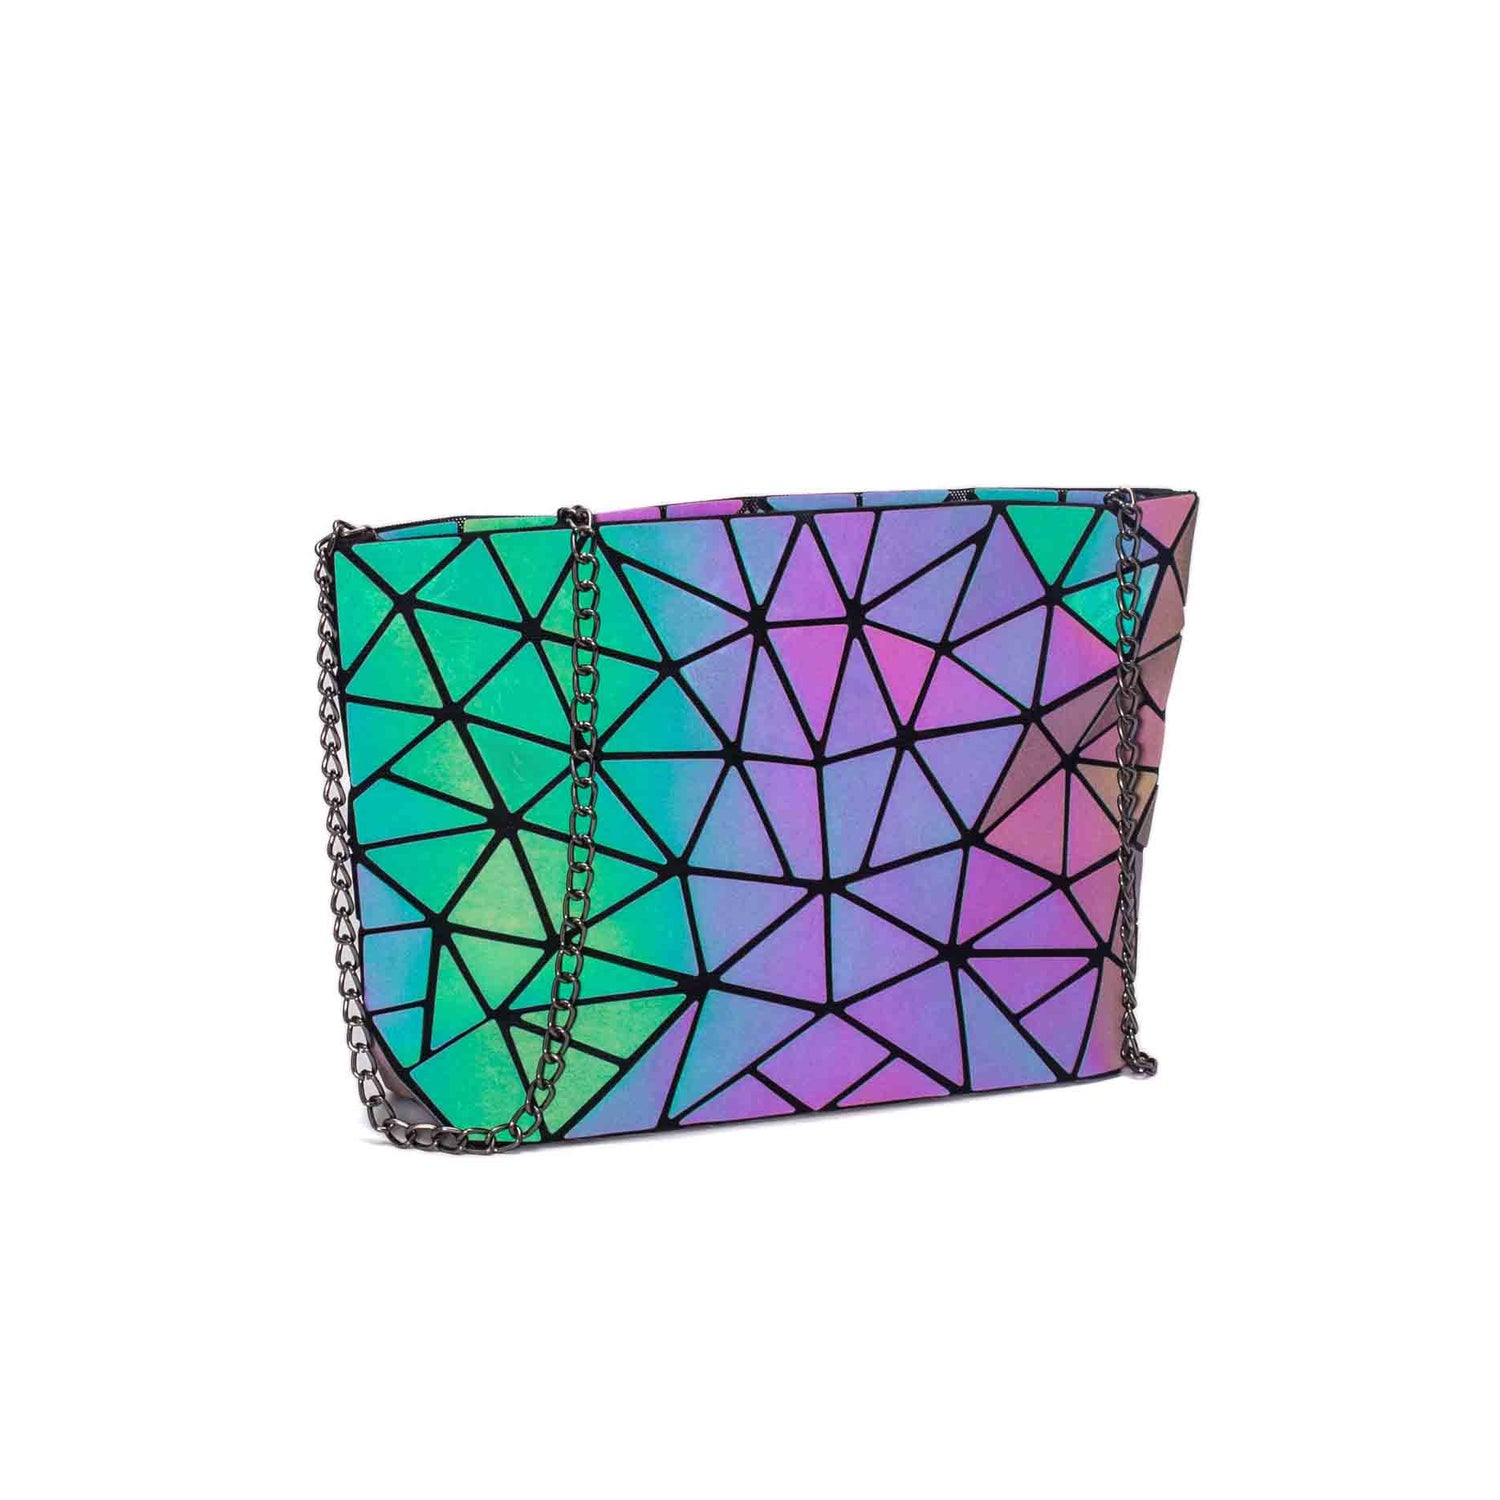 Chained Strap Flash Purse Medium Size with Geometric Shapes (Changes Color in sunlight and in photos and videos with flash on) Default